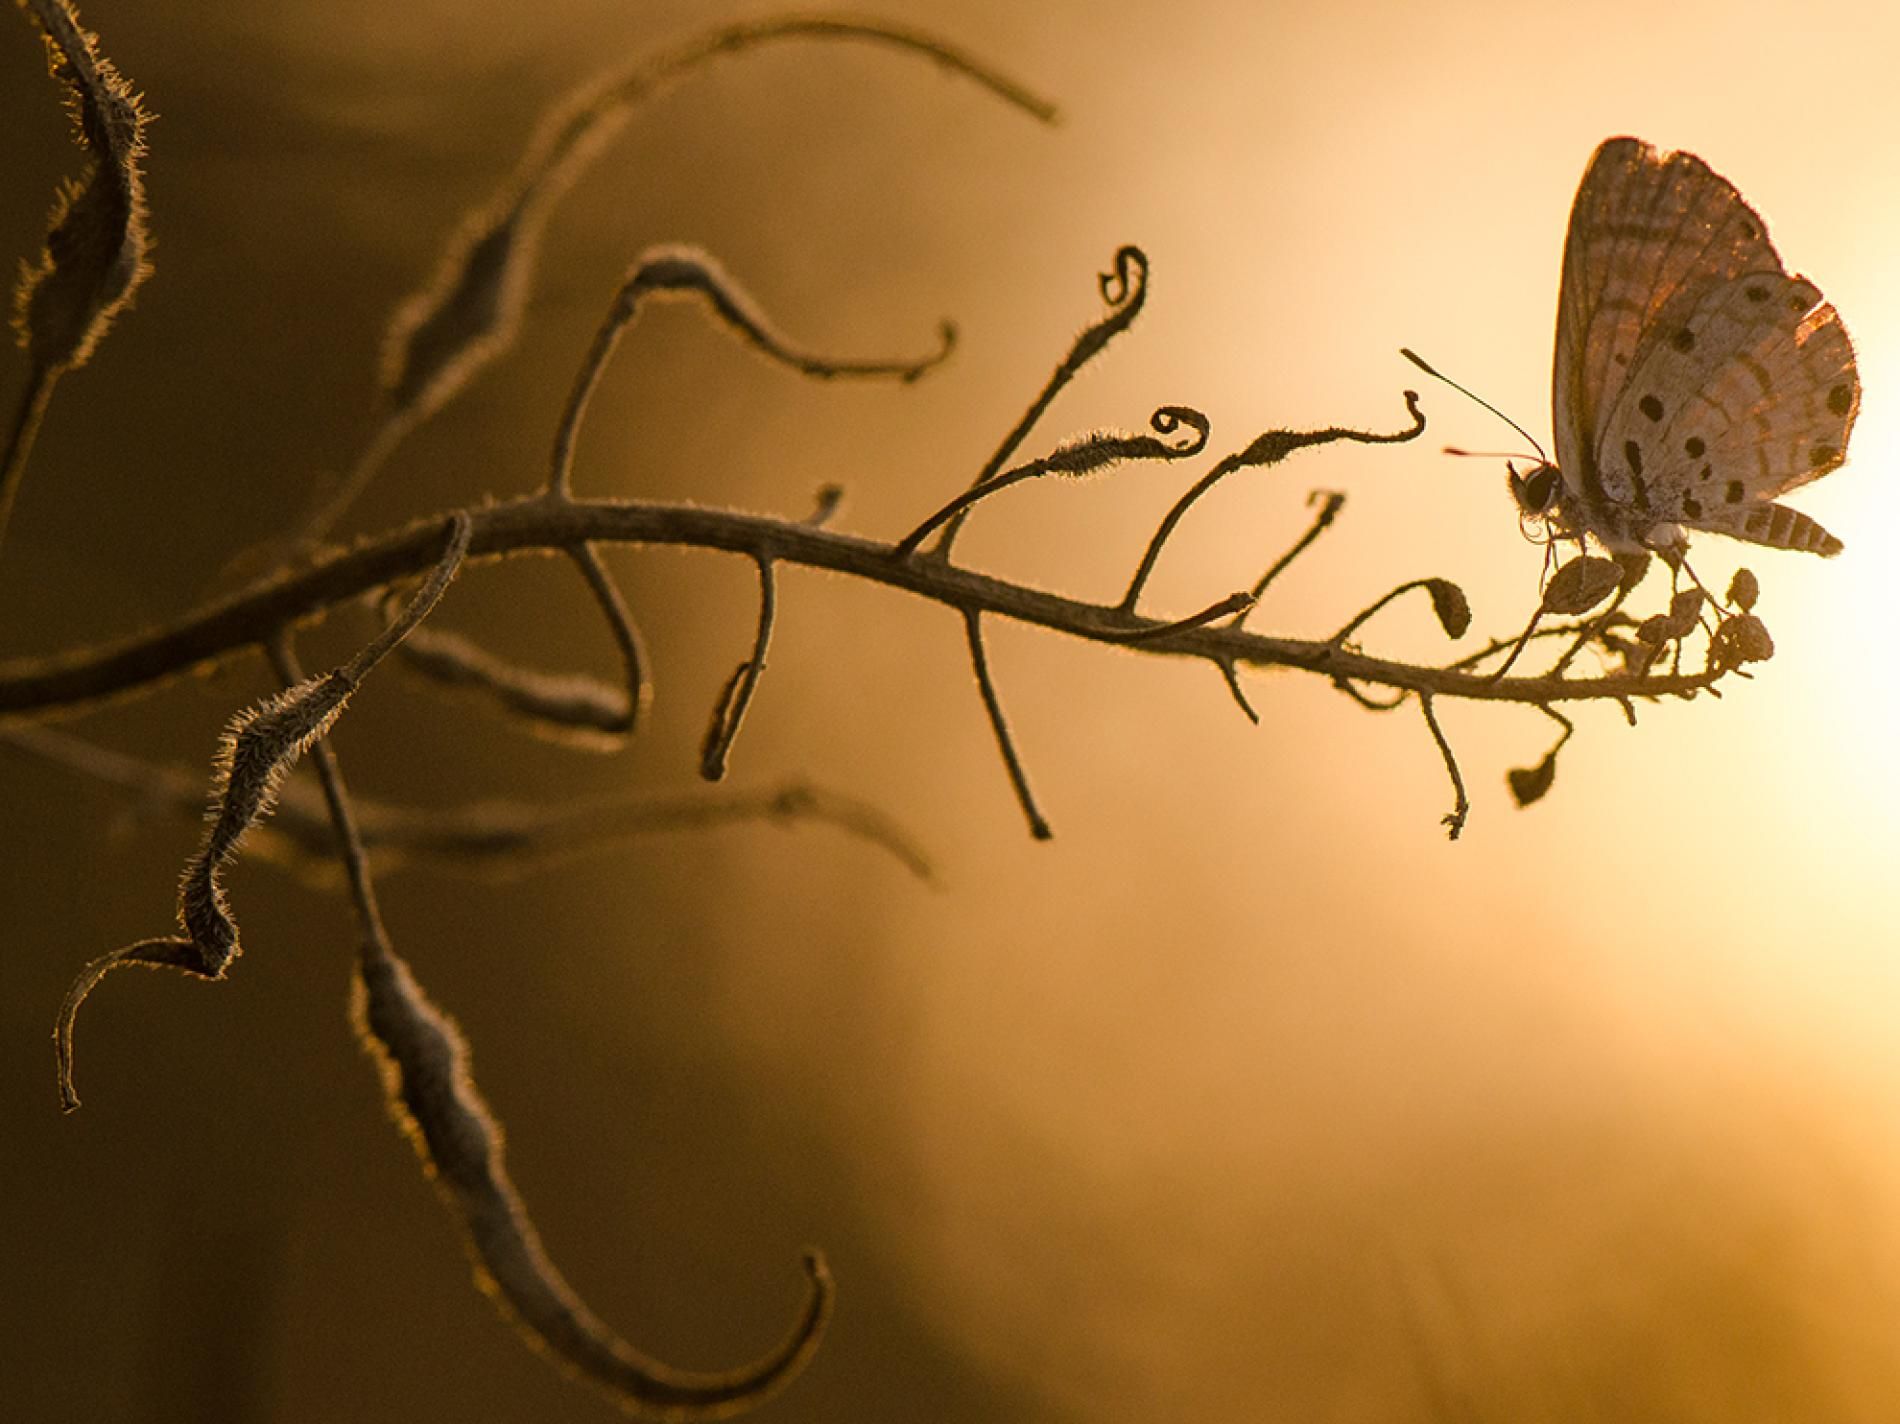 Butterfly at sunset Photo by Toni Guetta